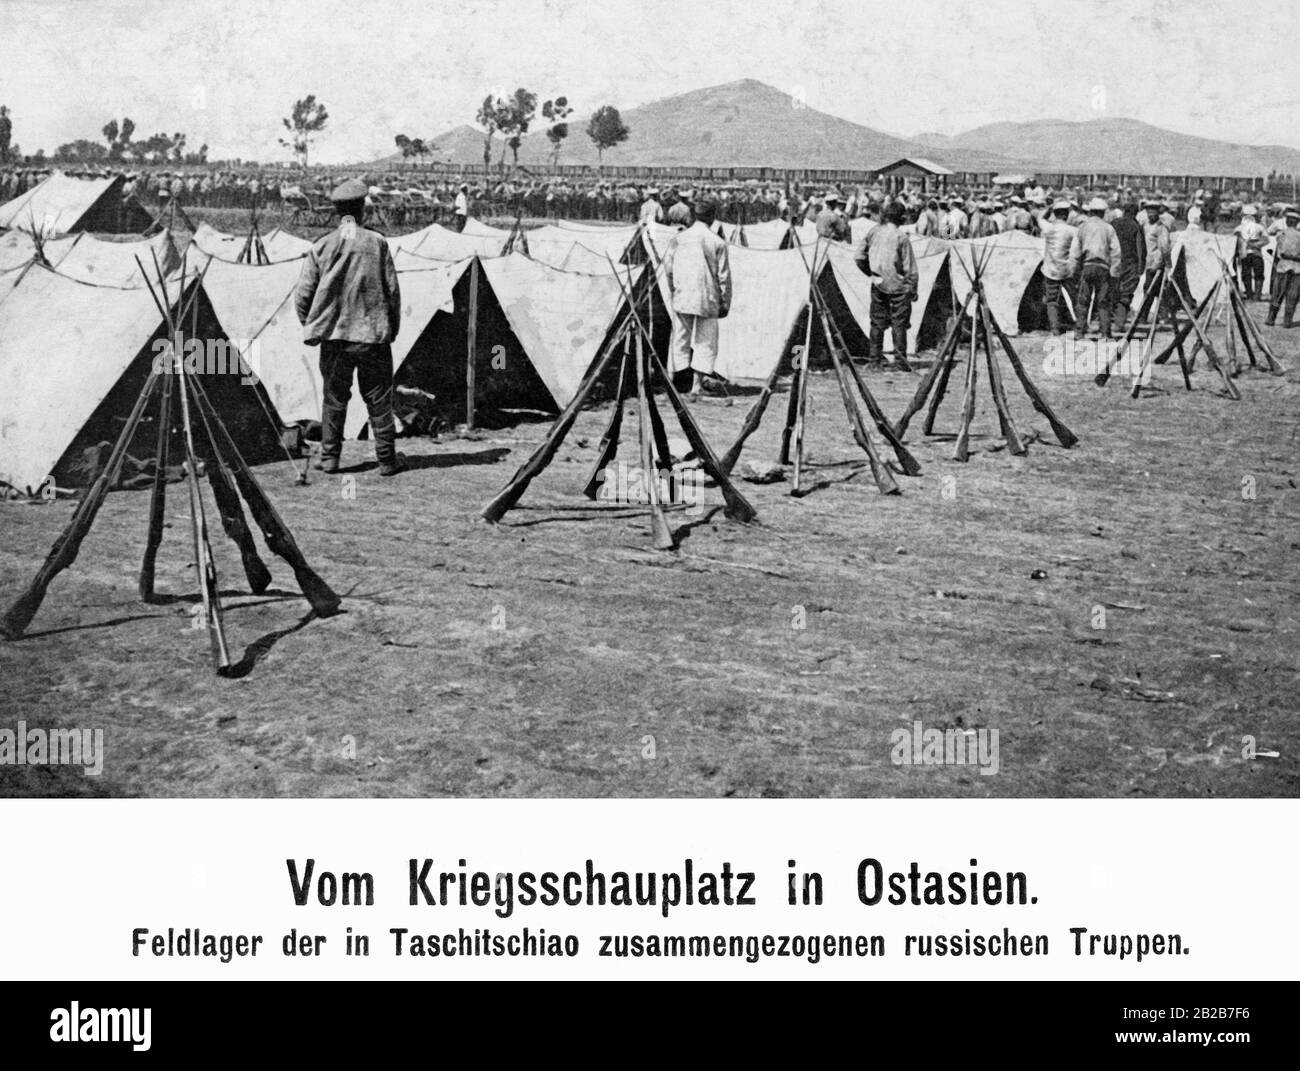 During the Russo-Japanese war: Camp of russian troops in East Asia. Stock Photo